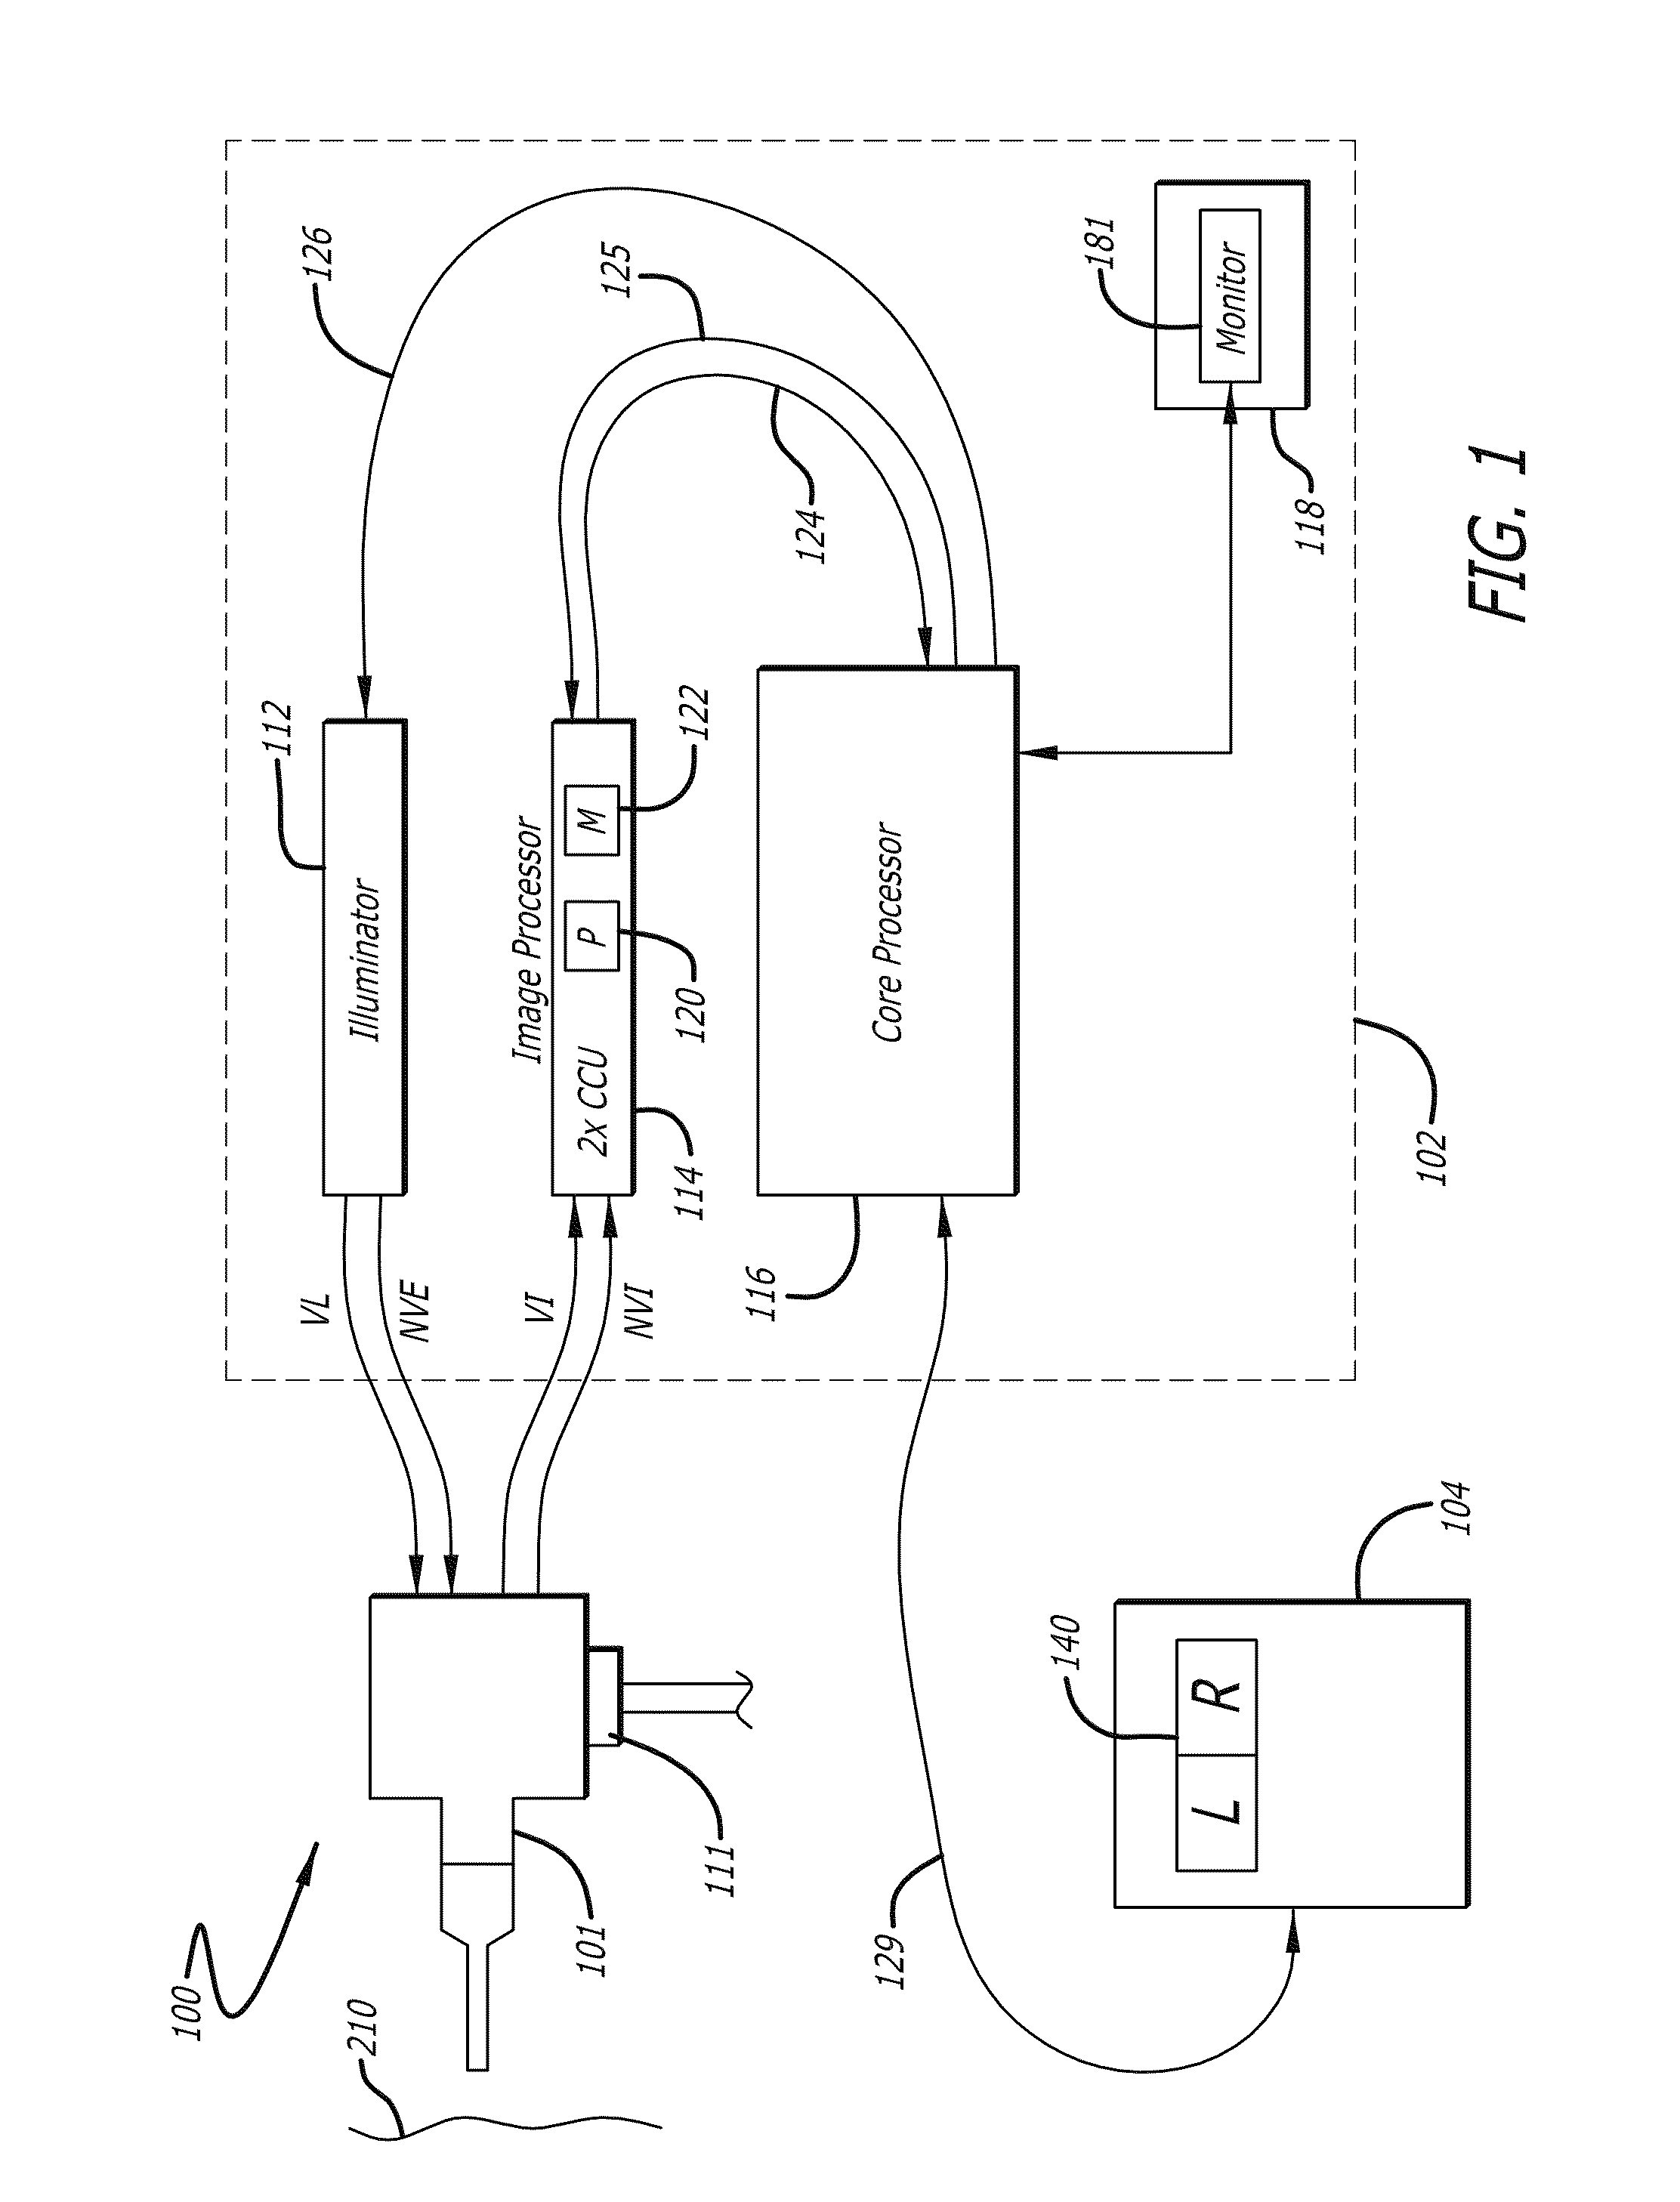 Methods and apparatus for displaying enhanced imaging data on a clinical image